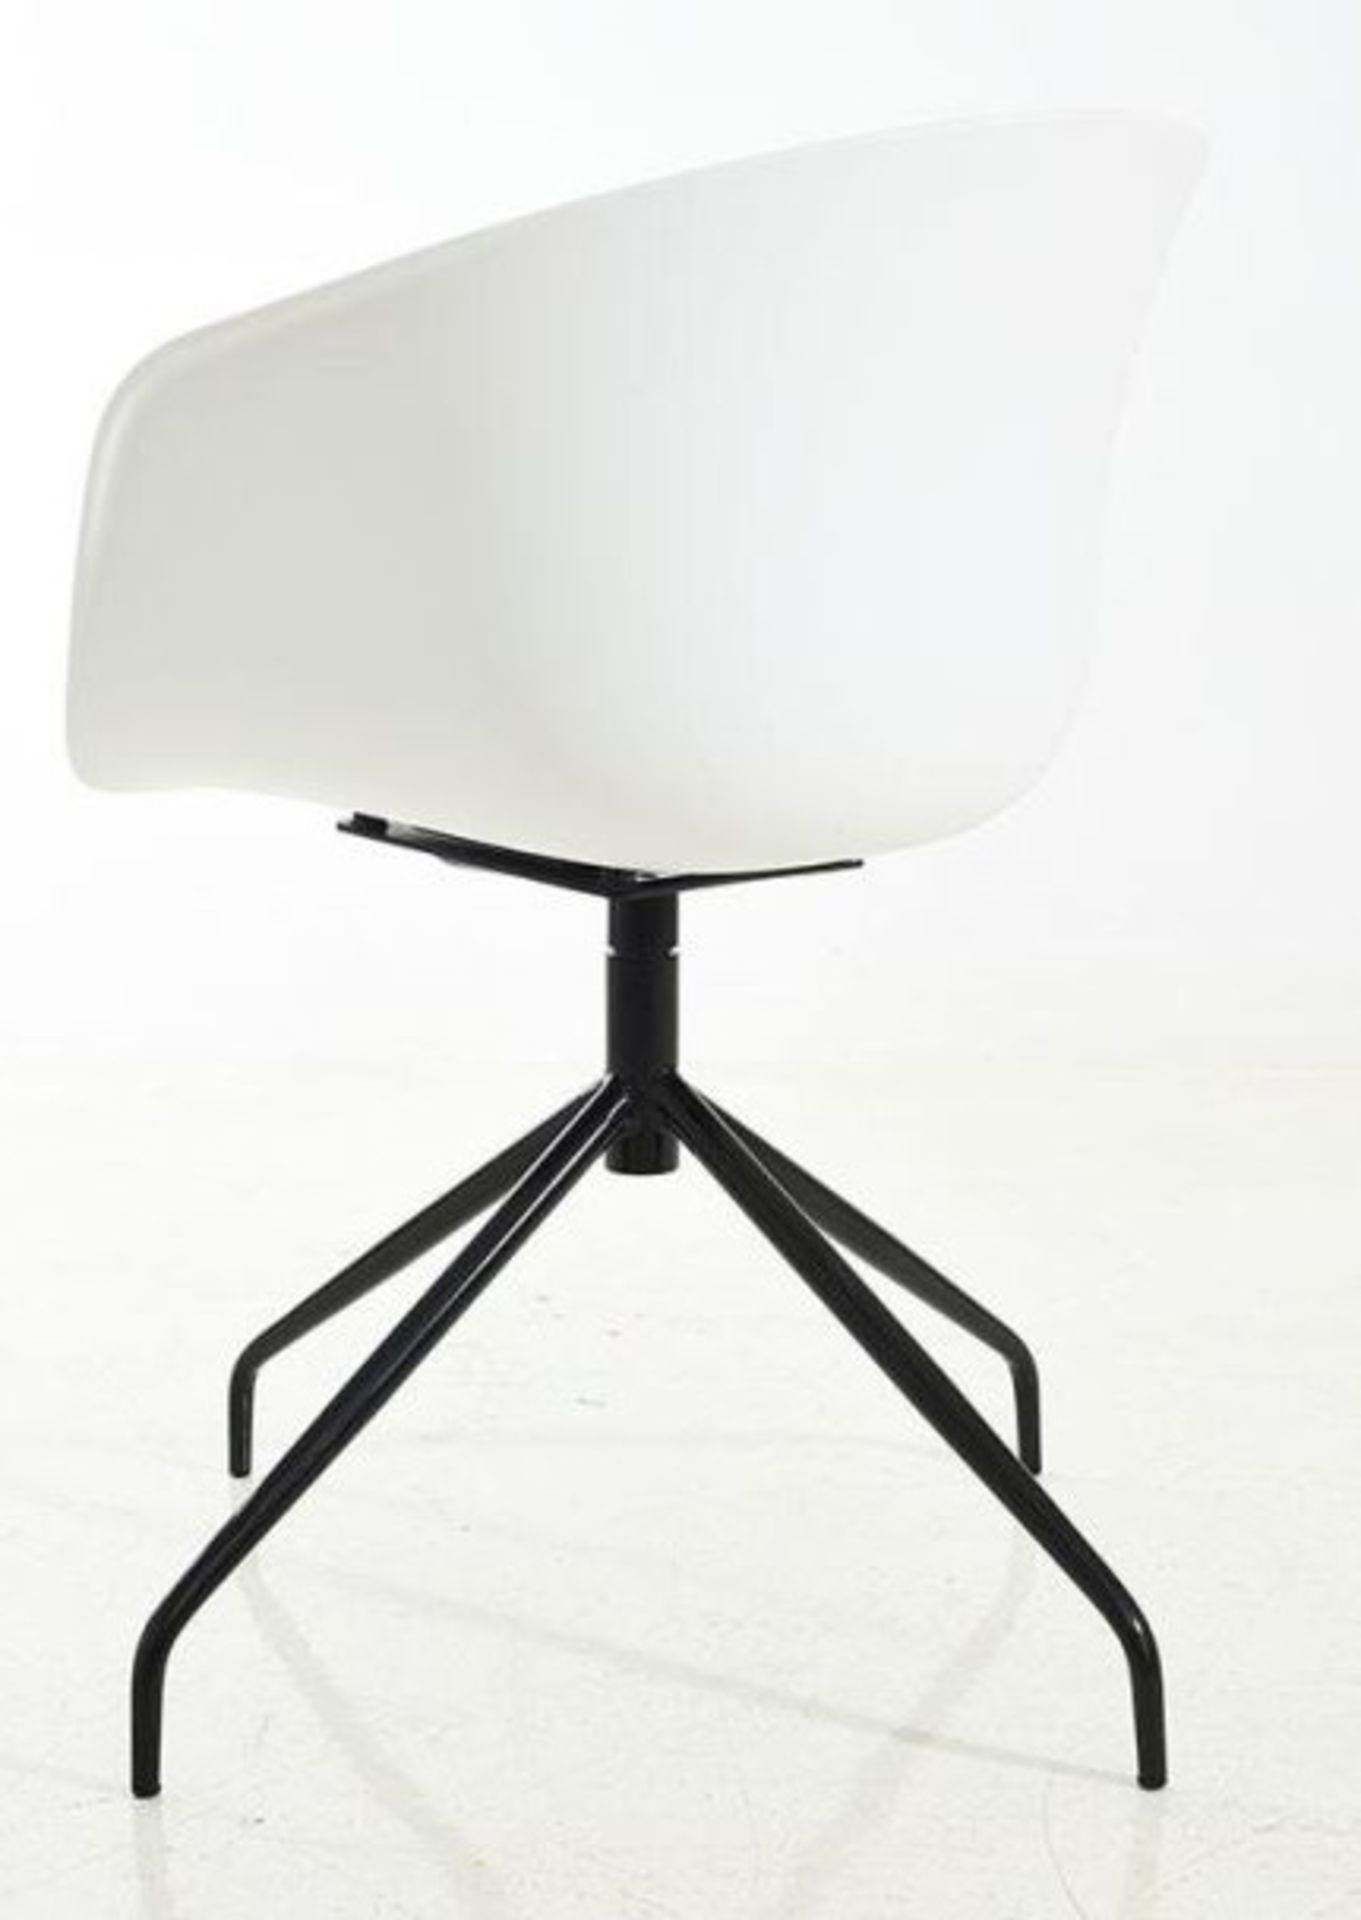 A Set Of 4 x Elegant 'NOVA' Swivel Dining Chairs With White Curved Seats And Black Metal Bases - - Image 3 of 4